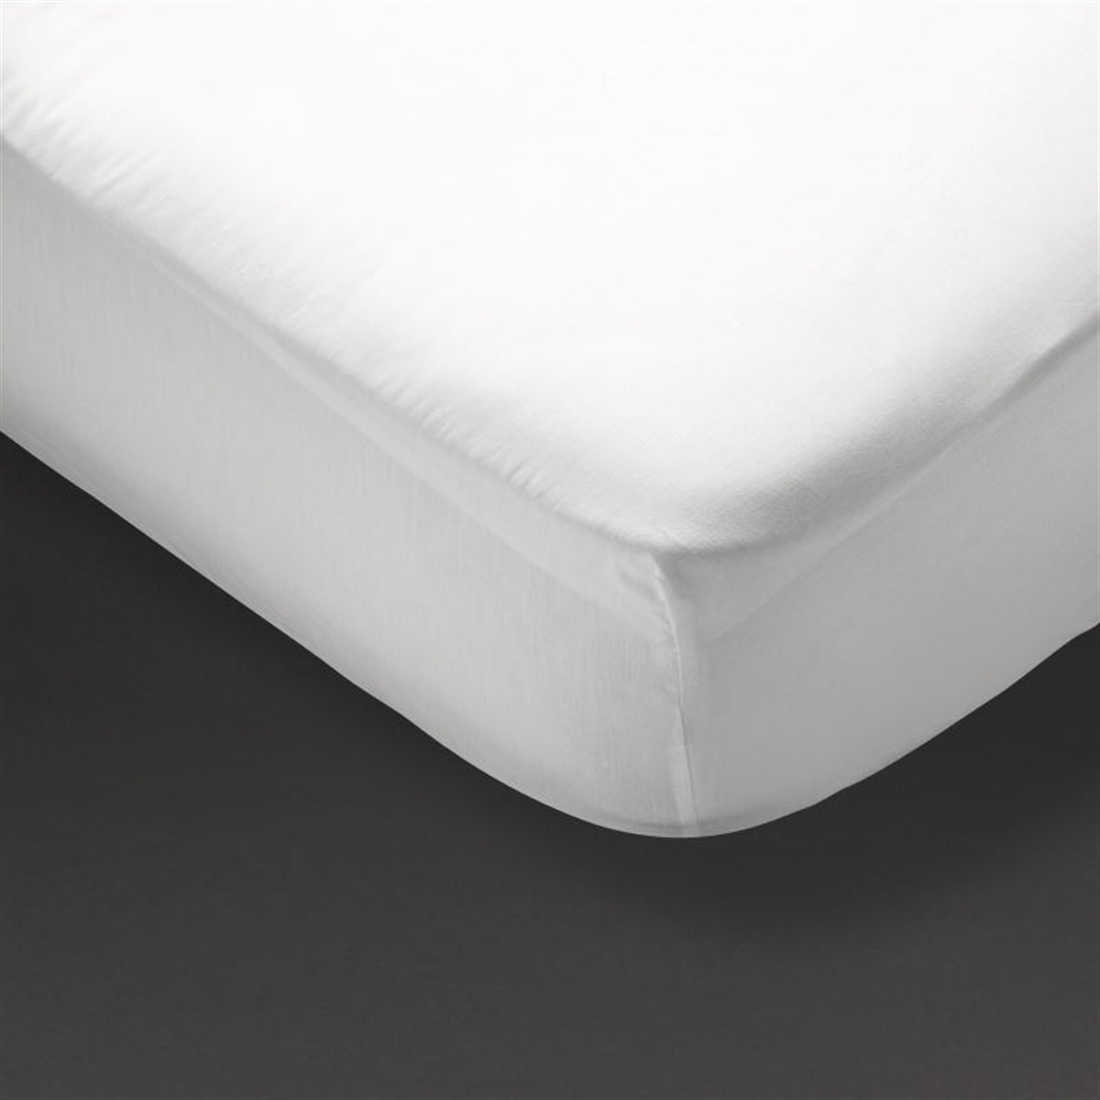 Mitre Essentials Spectrum Fitted Sheet White Double